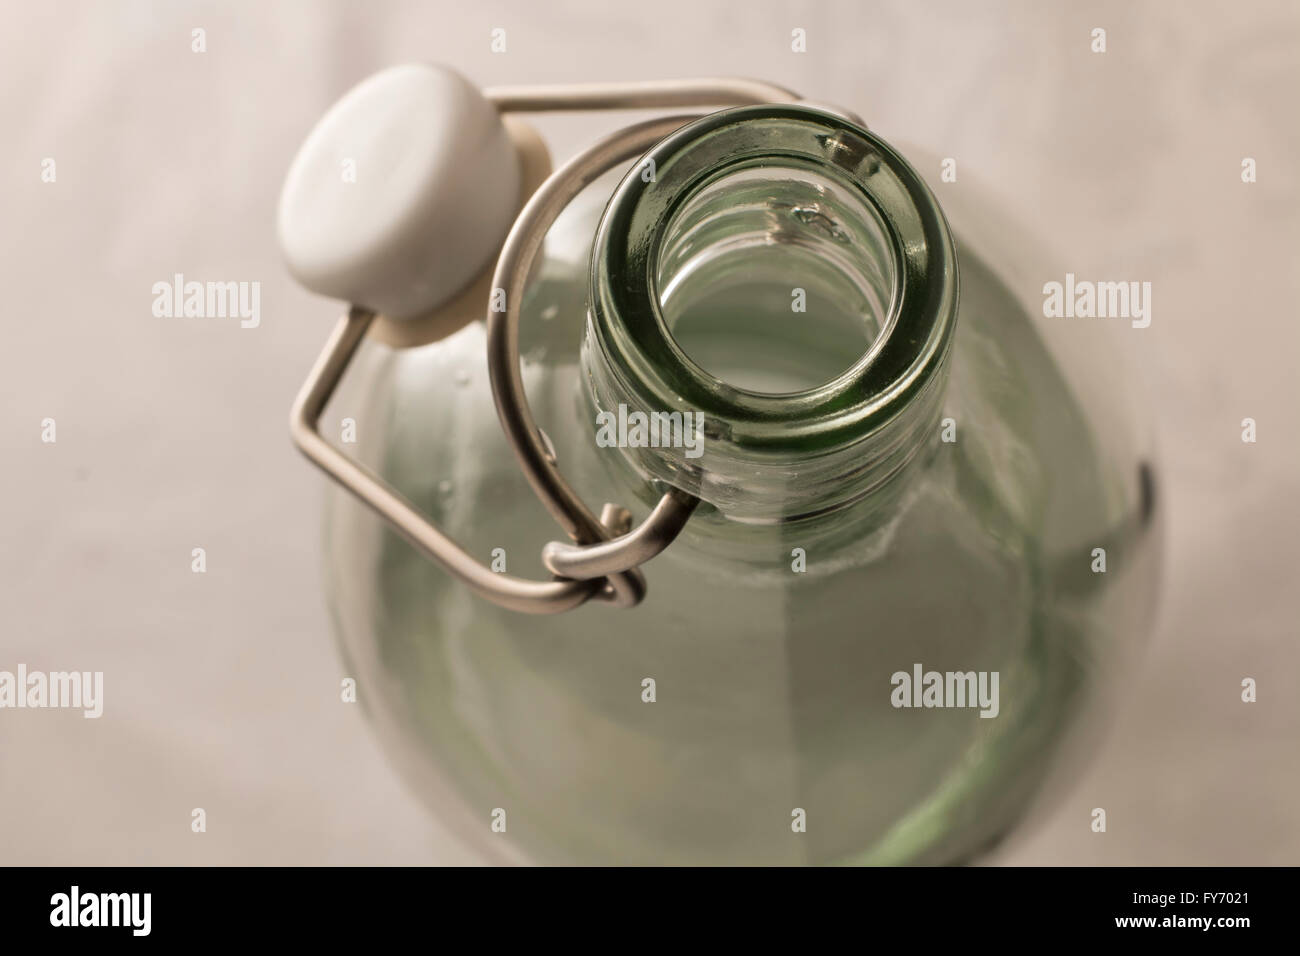 Glass bottle with stopper Stock Photo